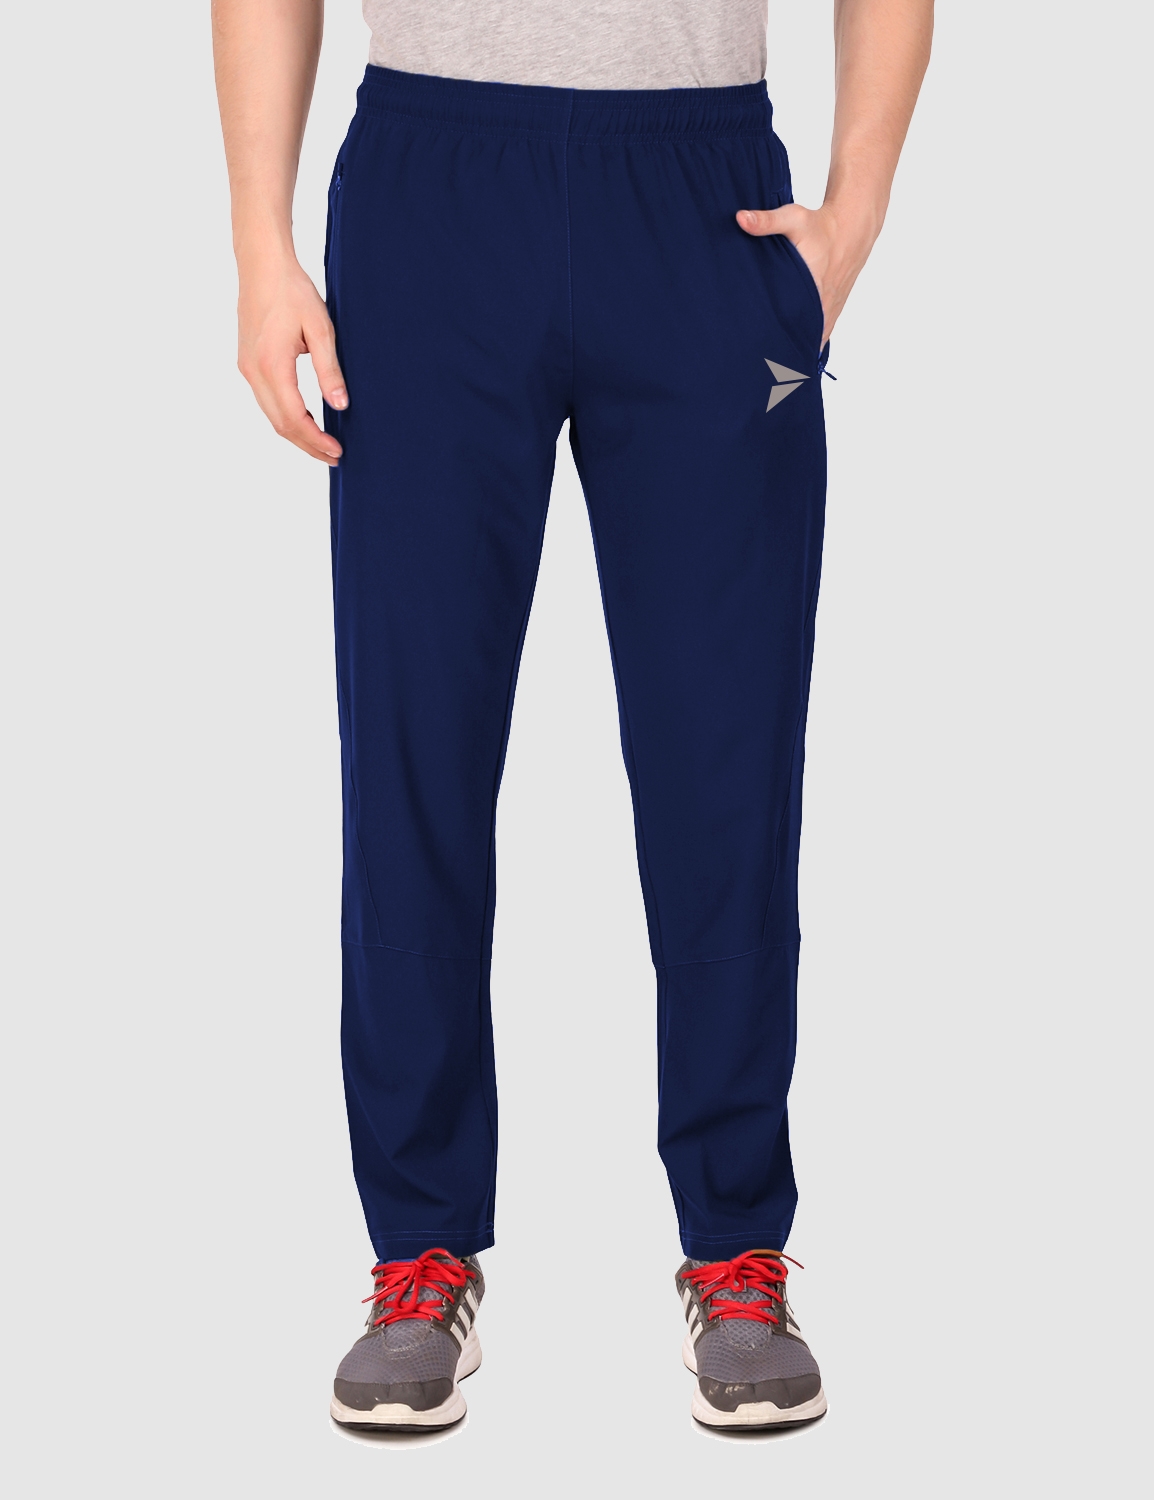 Fitinc NS Lycra Regular Fit Airforce Track pant for Men